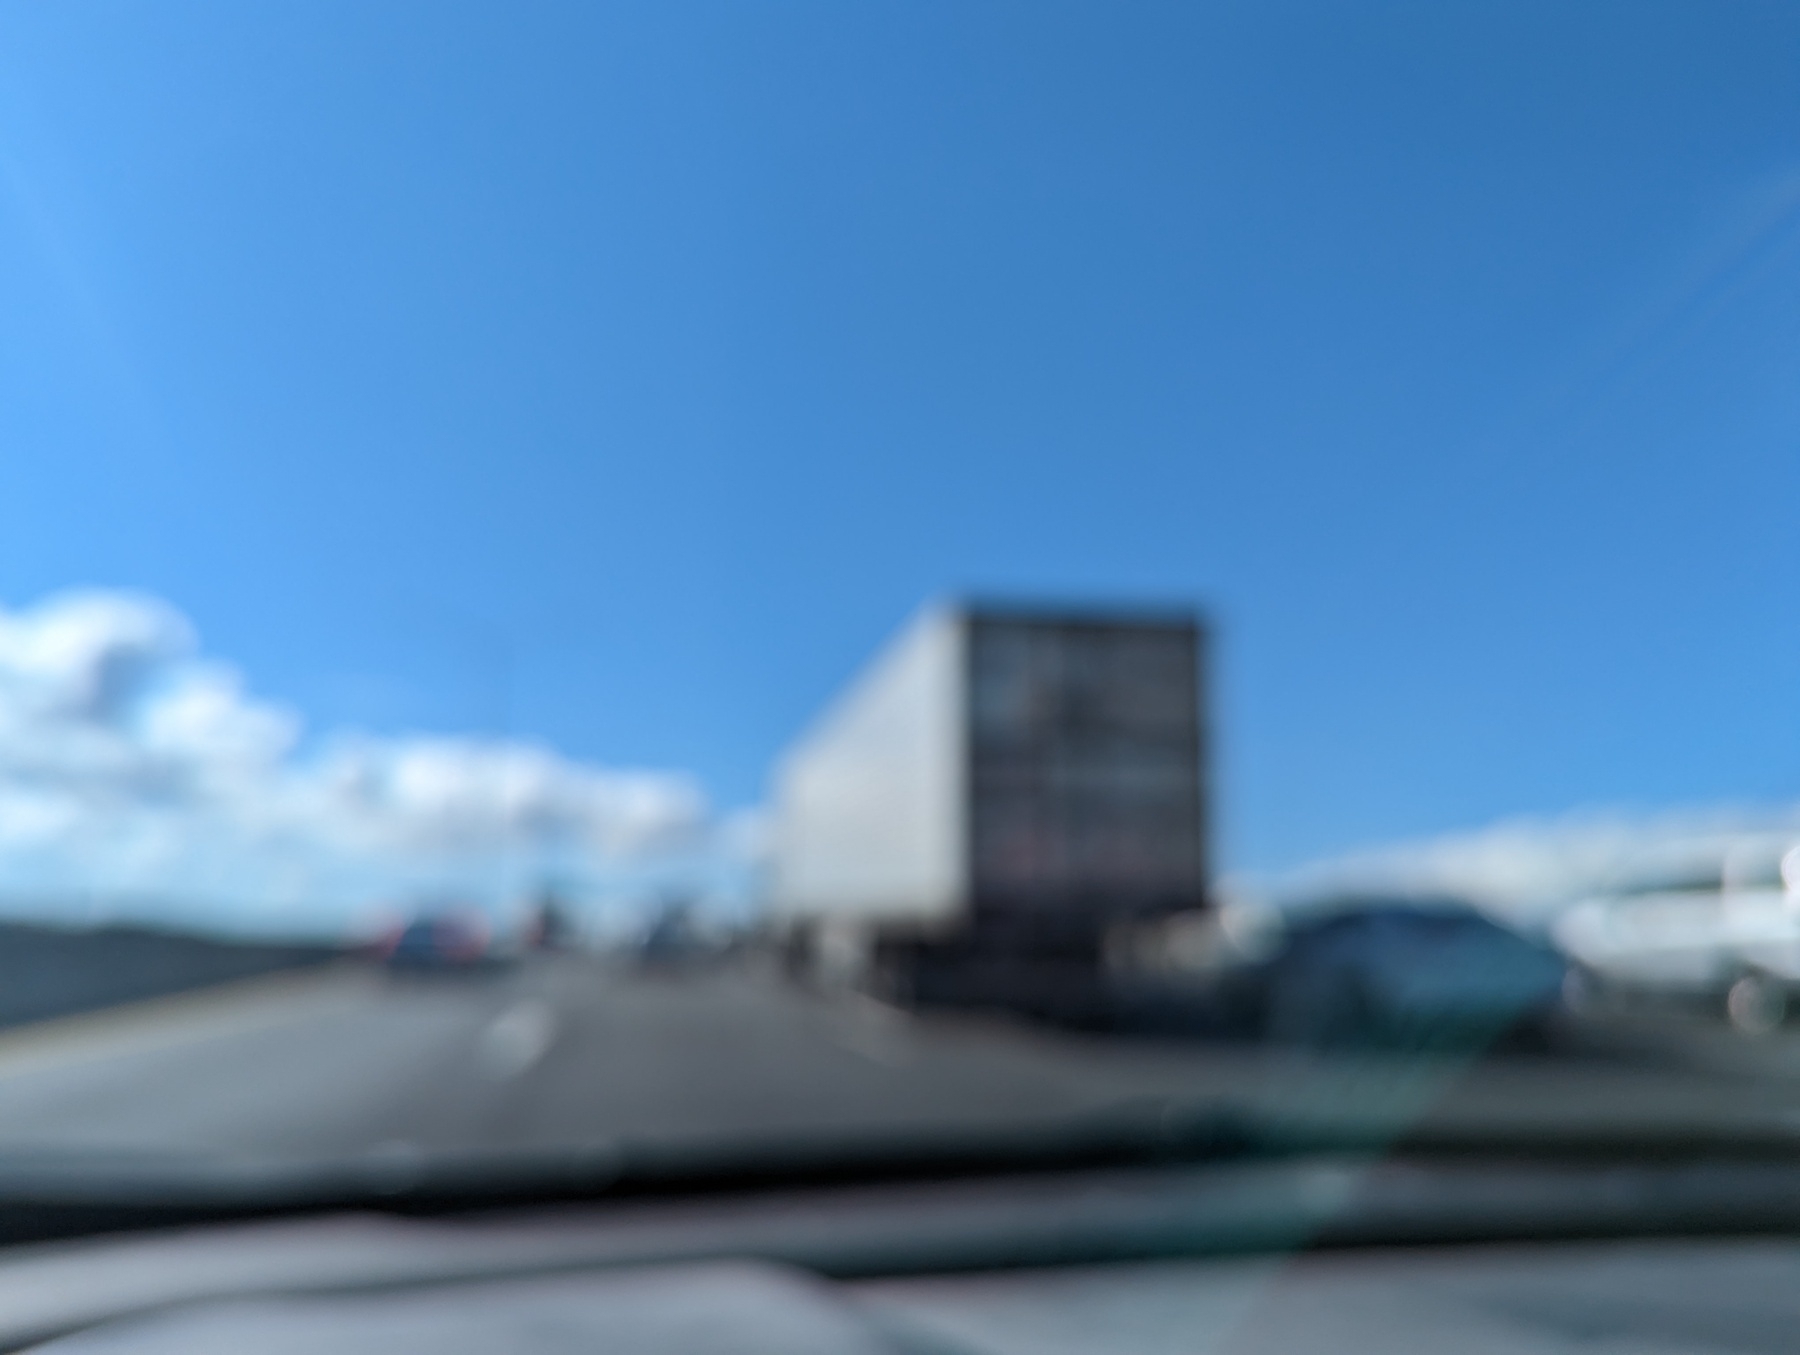 An out of focus image of a white Samia Xpress big rig truck out of Fresno California as seen through a car windshield traveling Thursday March 30th 2023 in westbound Interstate 80 traffic lanes in Albany, California under a bright blue skies in sunny weather with soft puffy white clouds along the horizon